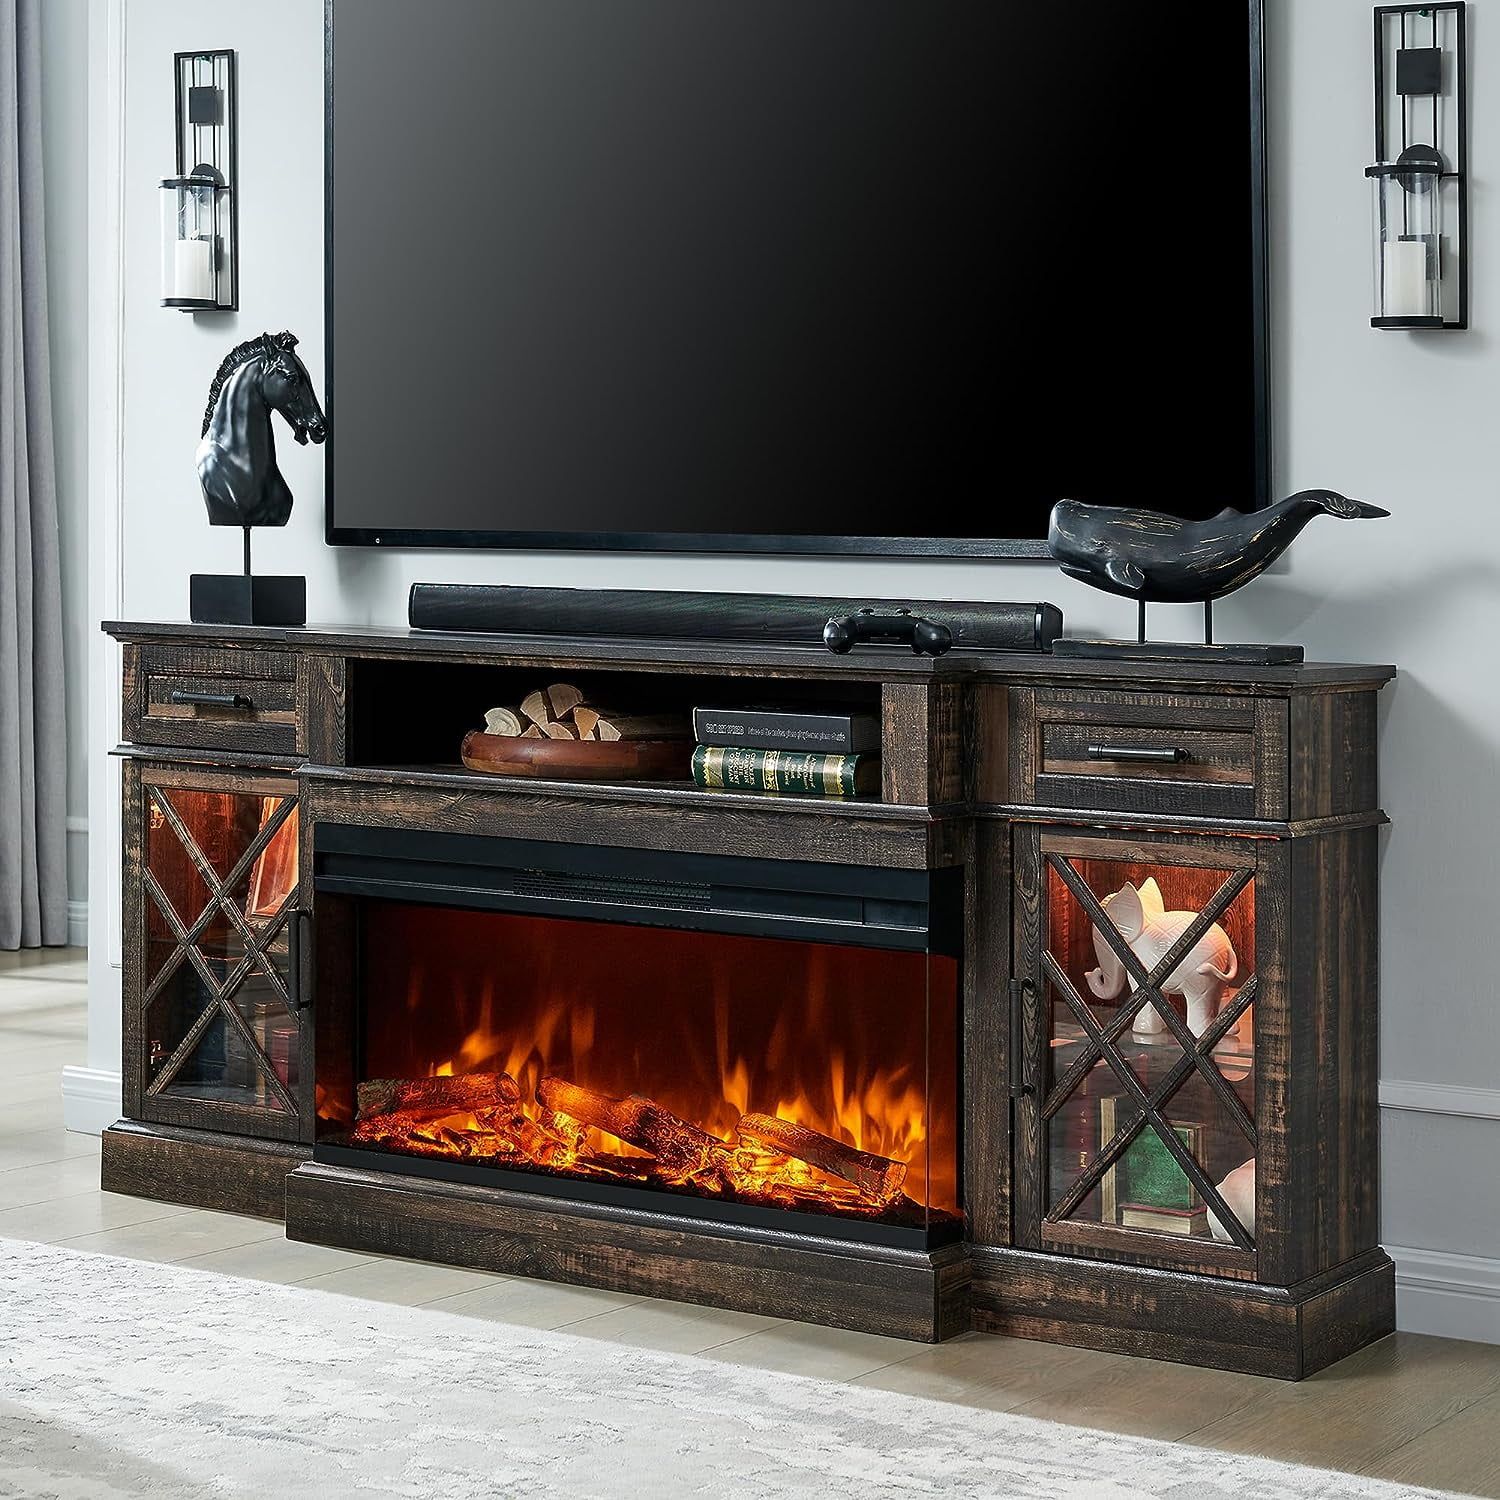 Okd 3 Sided Glass Farmhouse 70" Fireplace Tv Stand For Tvs Up To 80",  Highboy Entertainment Center With 36" Electric Fireplace, Dark Rustic Oak –  Walmart In Tv Stands With Electric Fireplace (View 14 of 15)